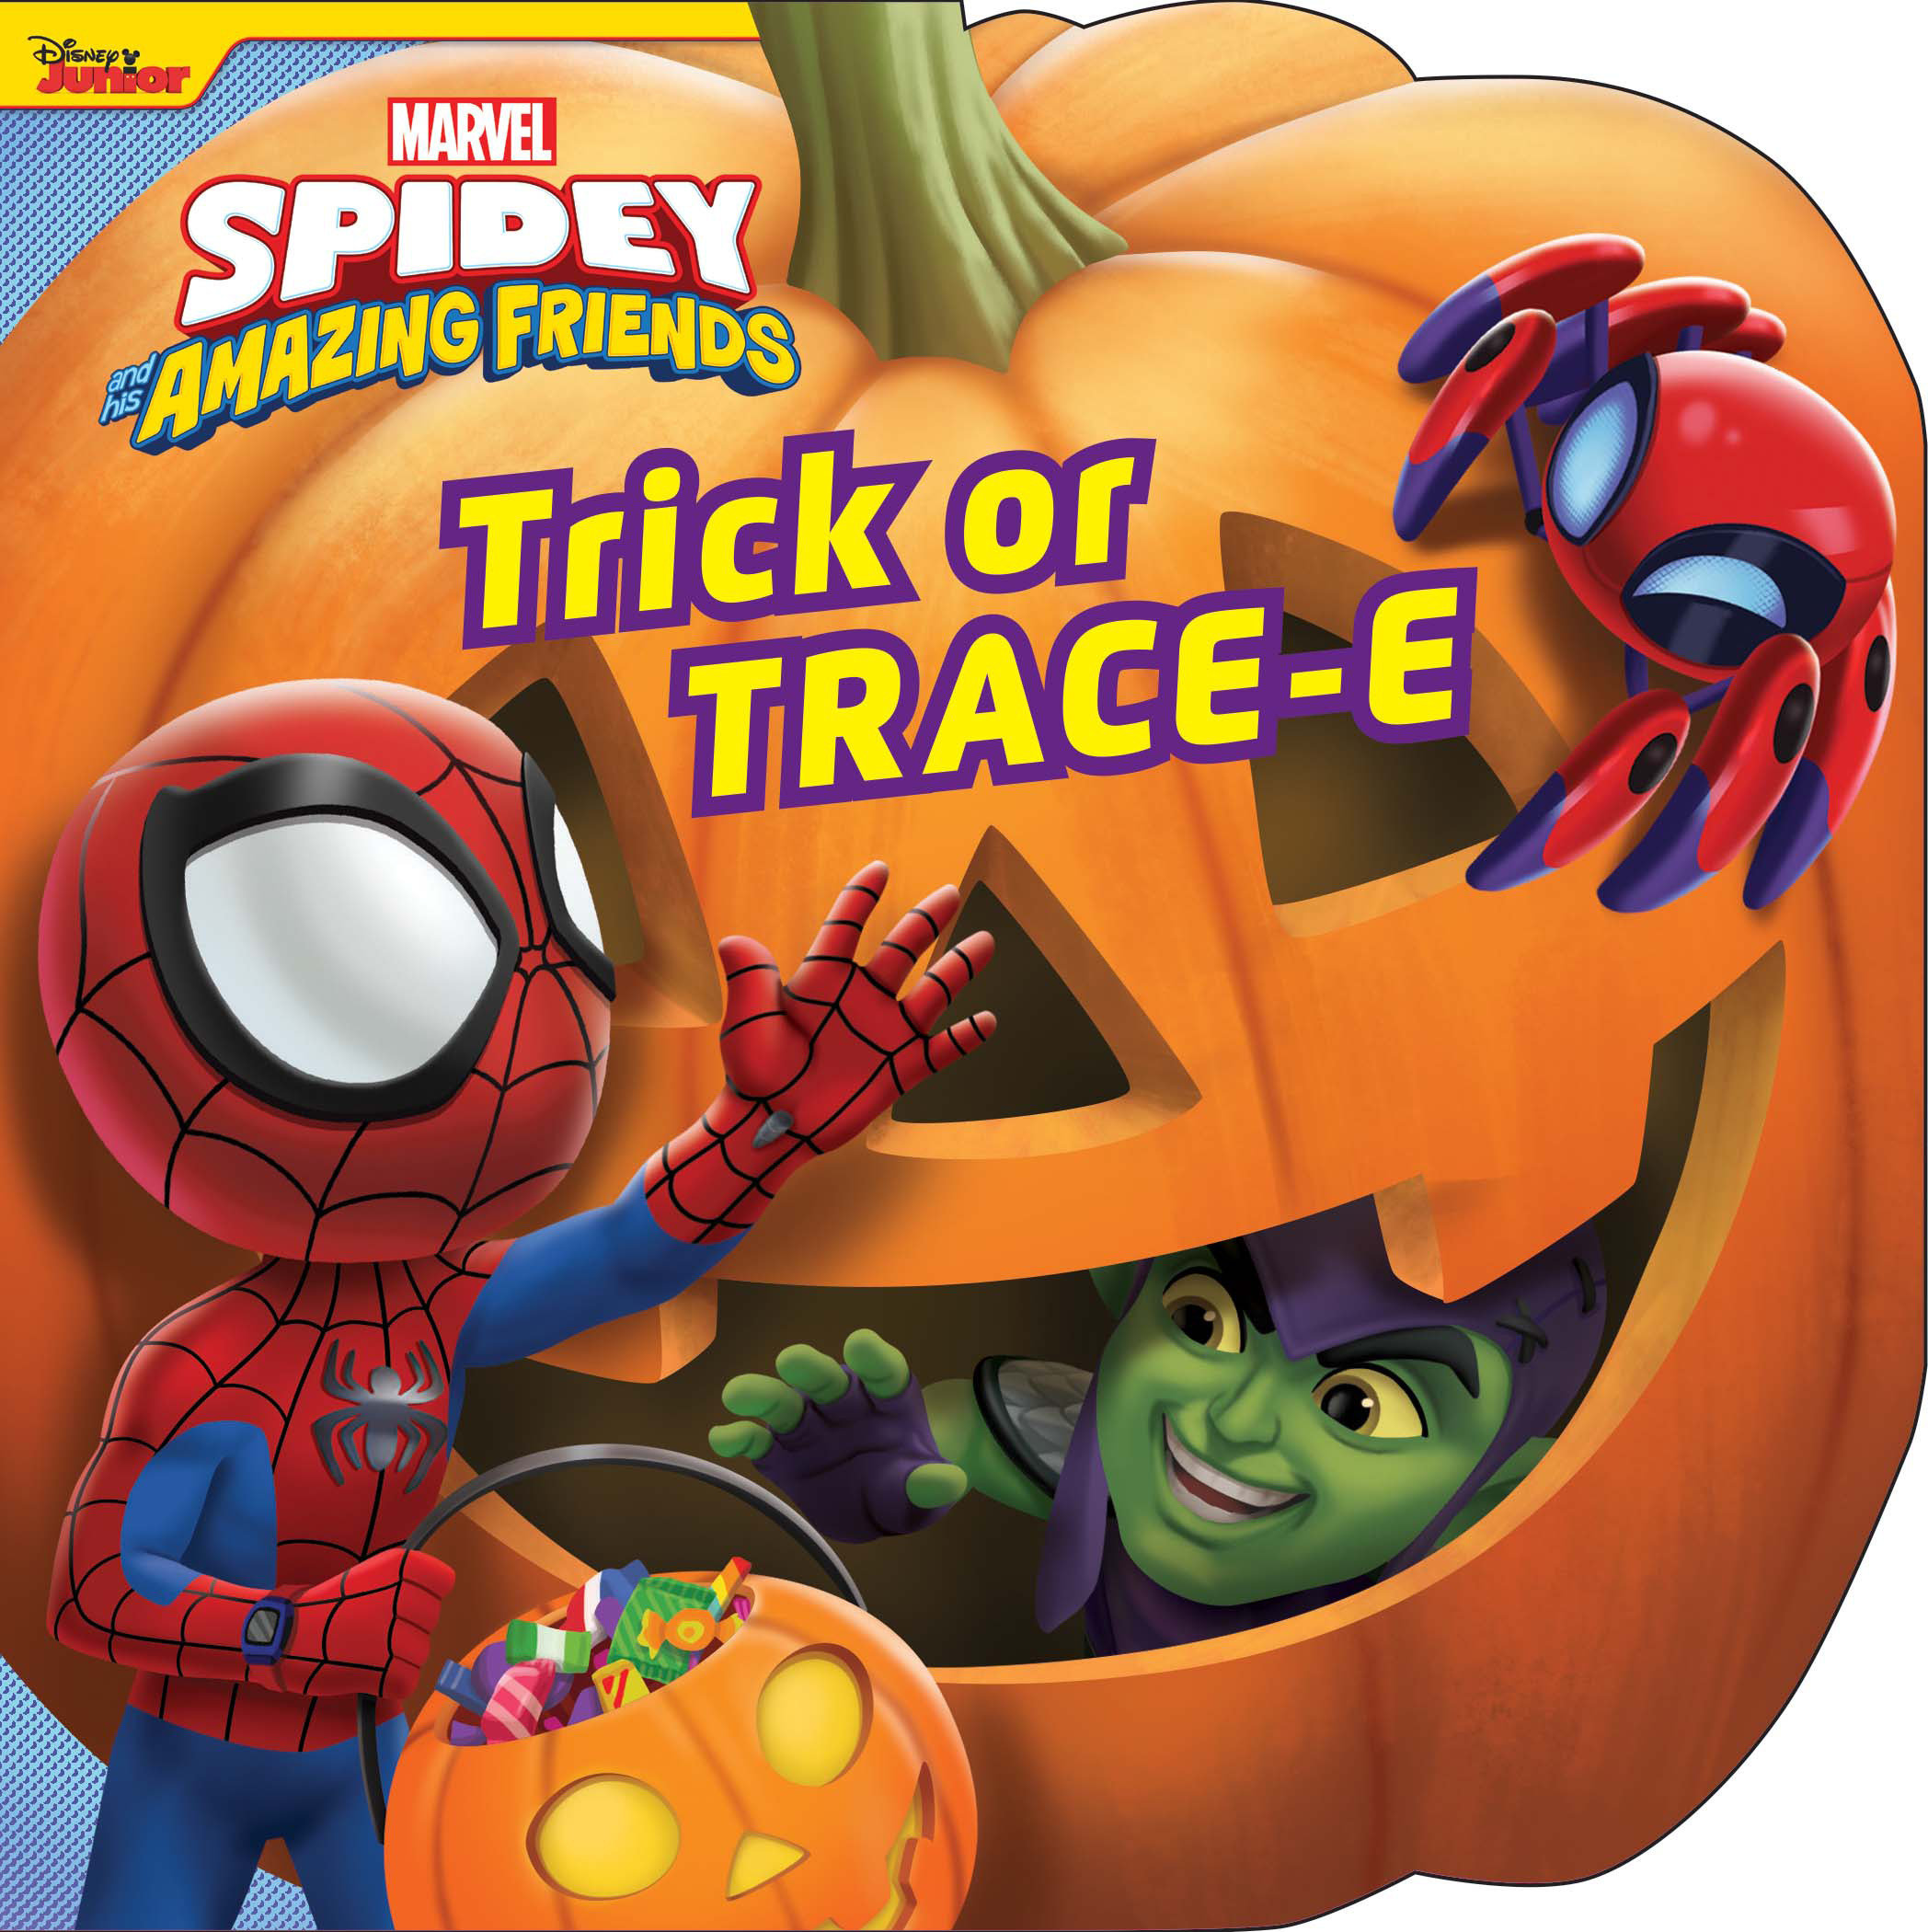 Spidey And His Amazing Friends: Trick Or Trace-E